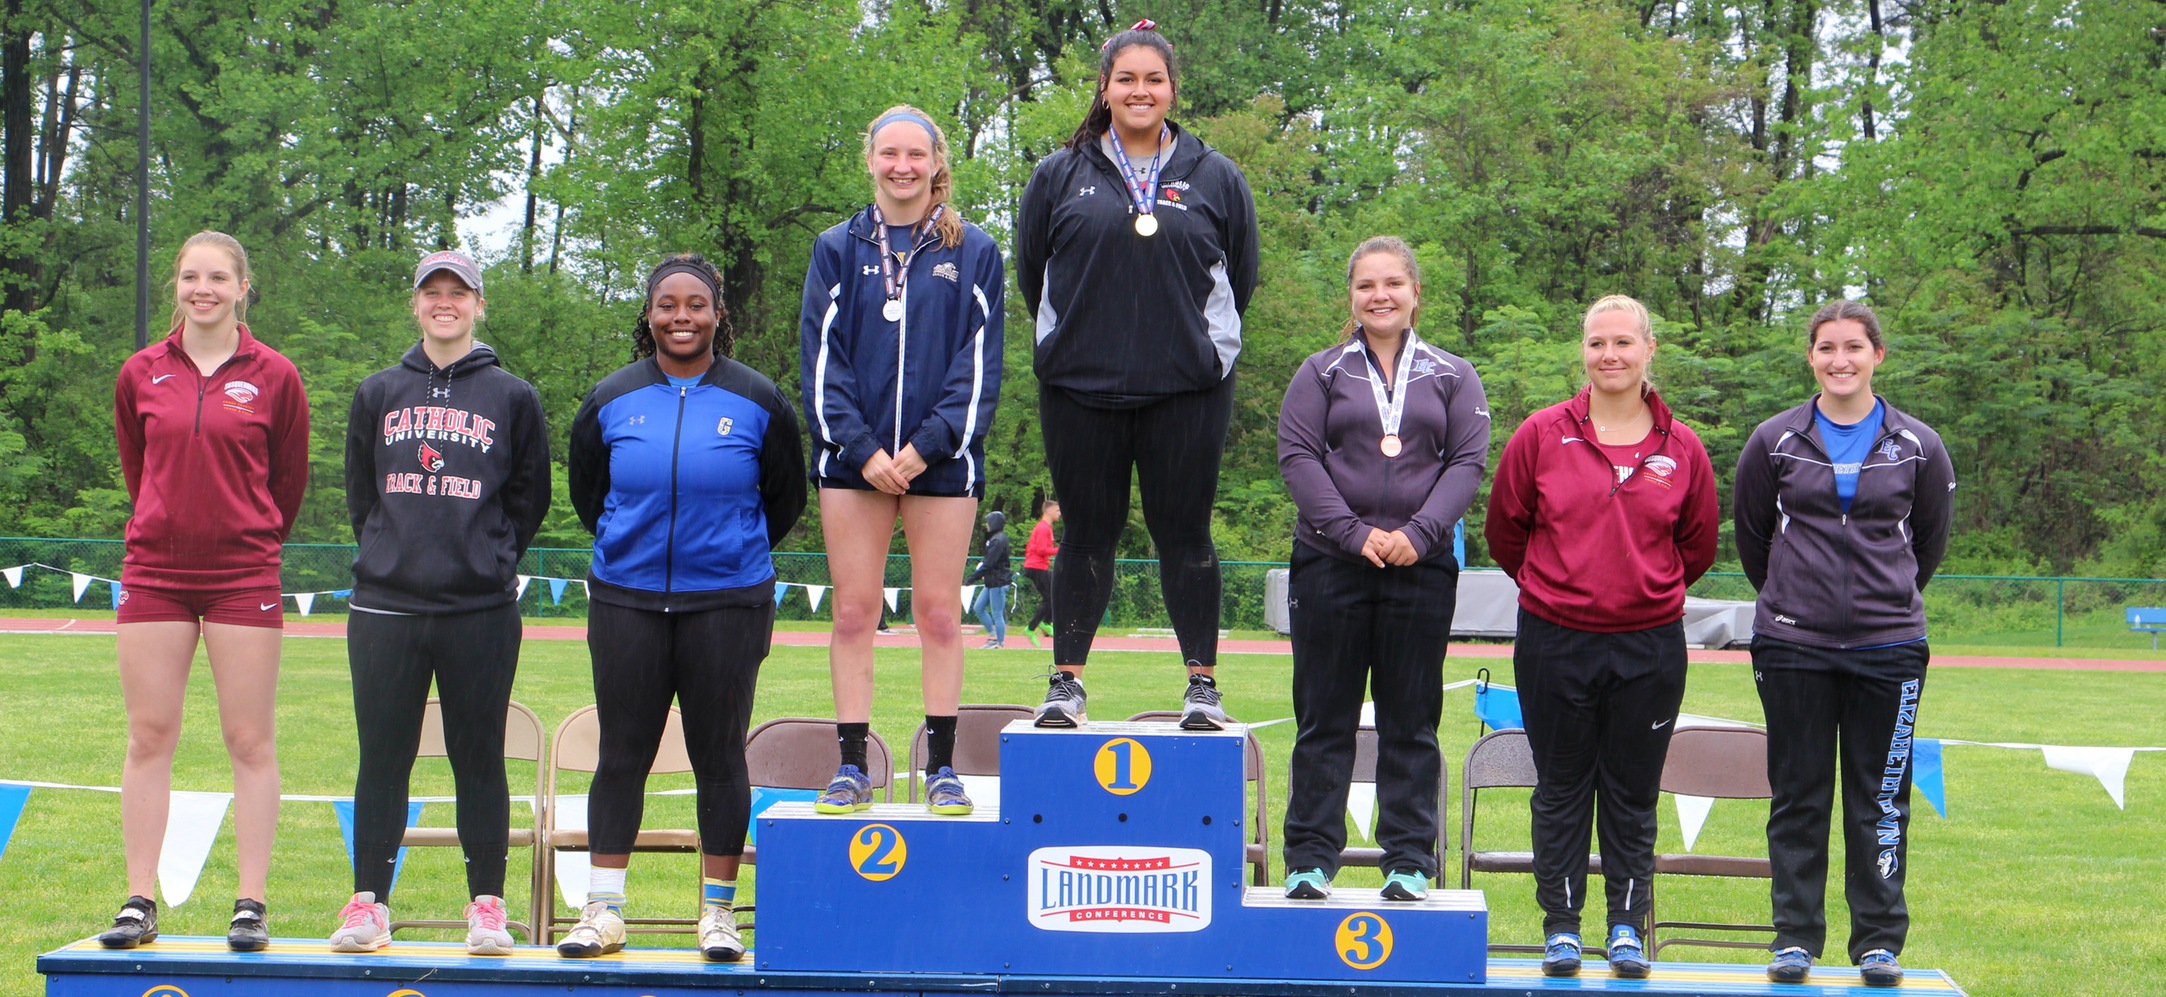 Kylie Orndorf placed 2nd in the hammer throw, Sunday at Landmark Championships and was named Landmark Field Athlete of the Year.